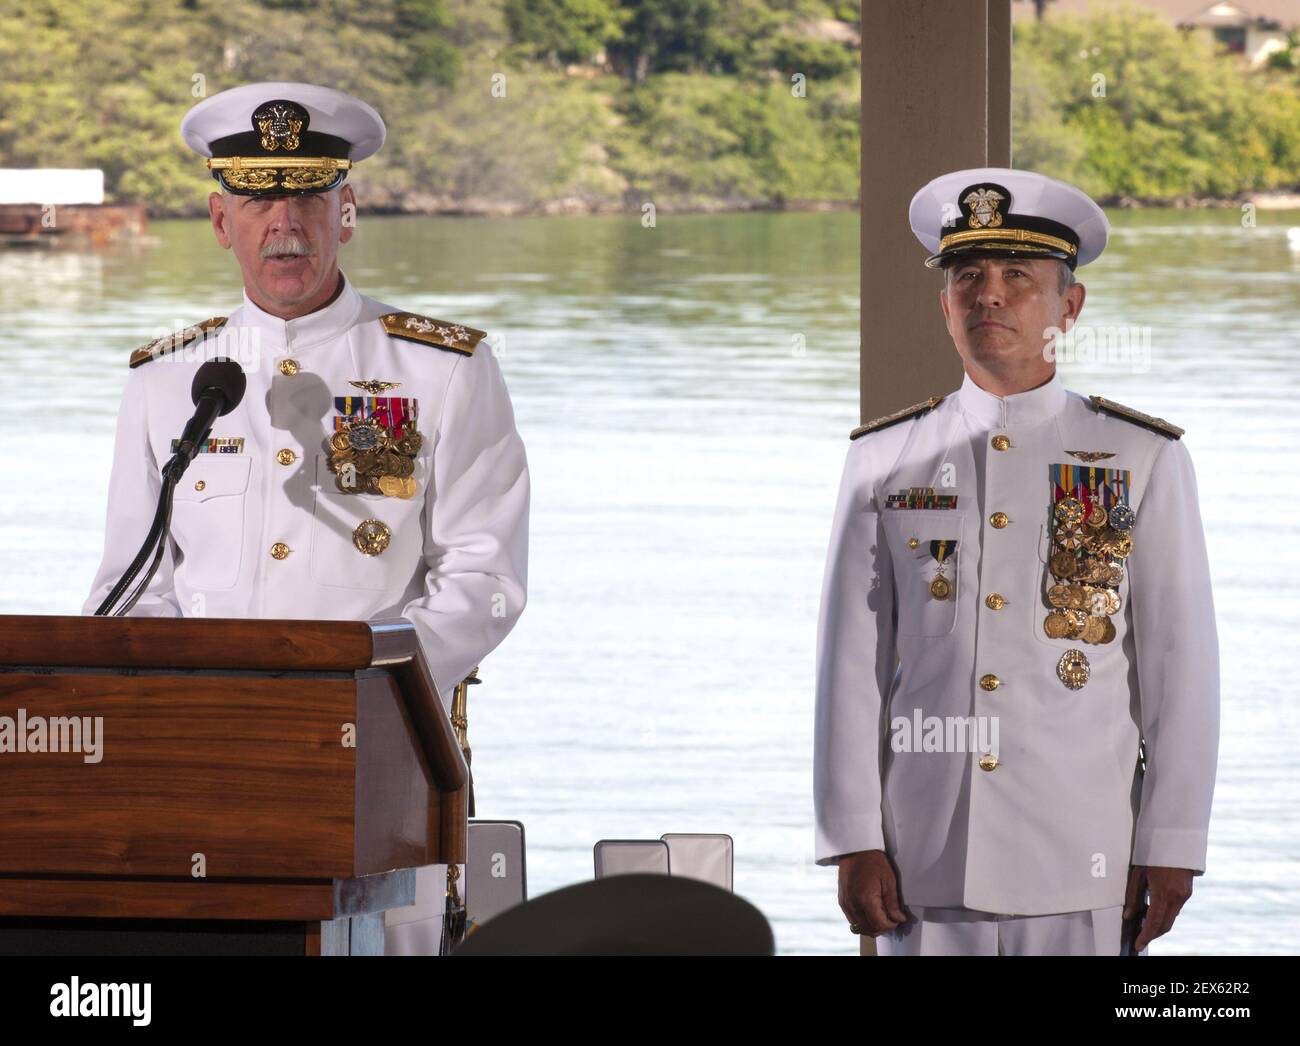 PEARL HARBOR (May 27, 2015) Adm. Scott H. Swift reads his orders as he assumes command of U.S. Pacific Fleet from Adm. Harry B. Harris Jr., right, during the joint U.S. Pacific Command and U.S. Pacific Fleet change of command ceremony at Joint Base Pearl Harbor-Hickam. Swift relieved Harris as the U.S. Pacific Fleet commander and Harris assumed command of U.S. Pacific Command from Adm. Samuel J. Locklear III. (Photo by Mass Communication Specialist 2nd Class Diana Quinlan/U.S. Navy) *** Please Use Credit from Credit Field *** Stock Photo